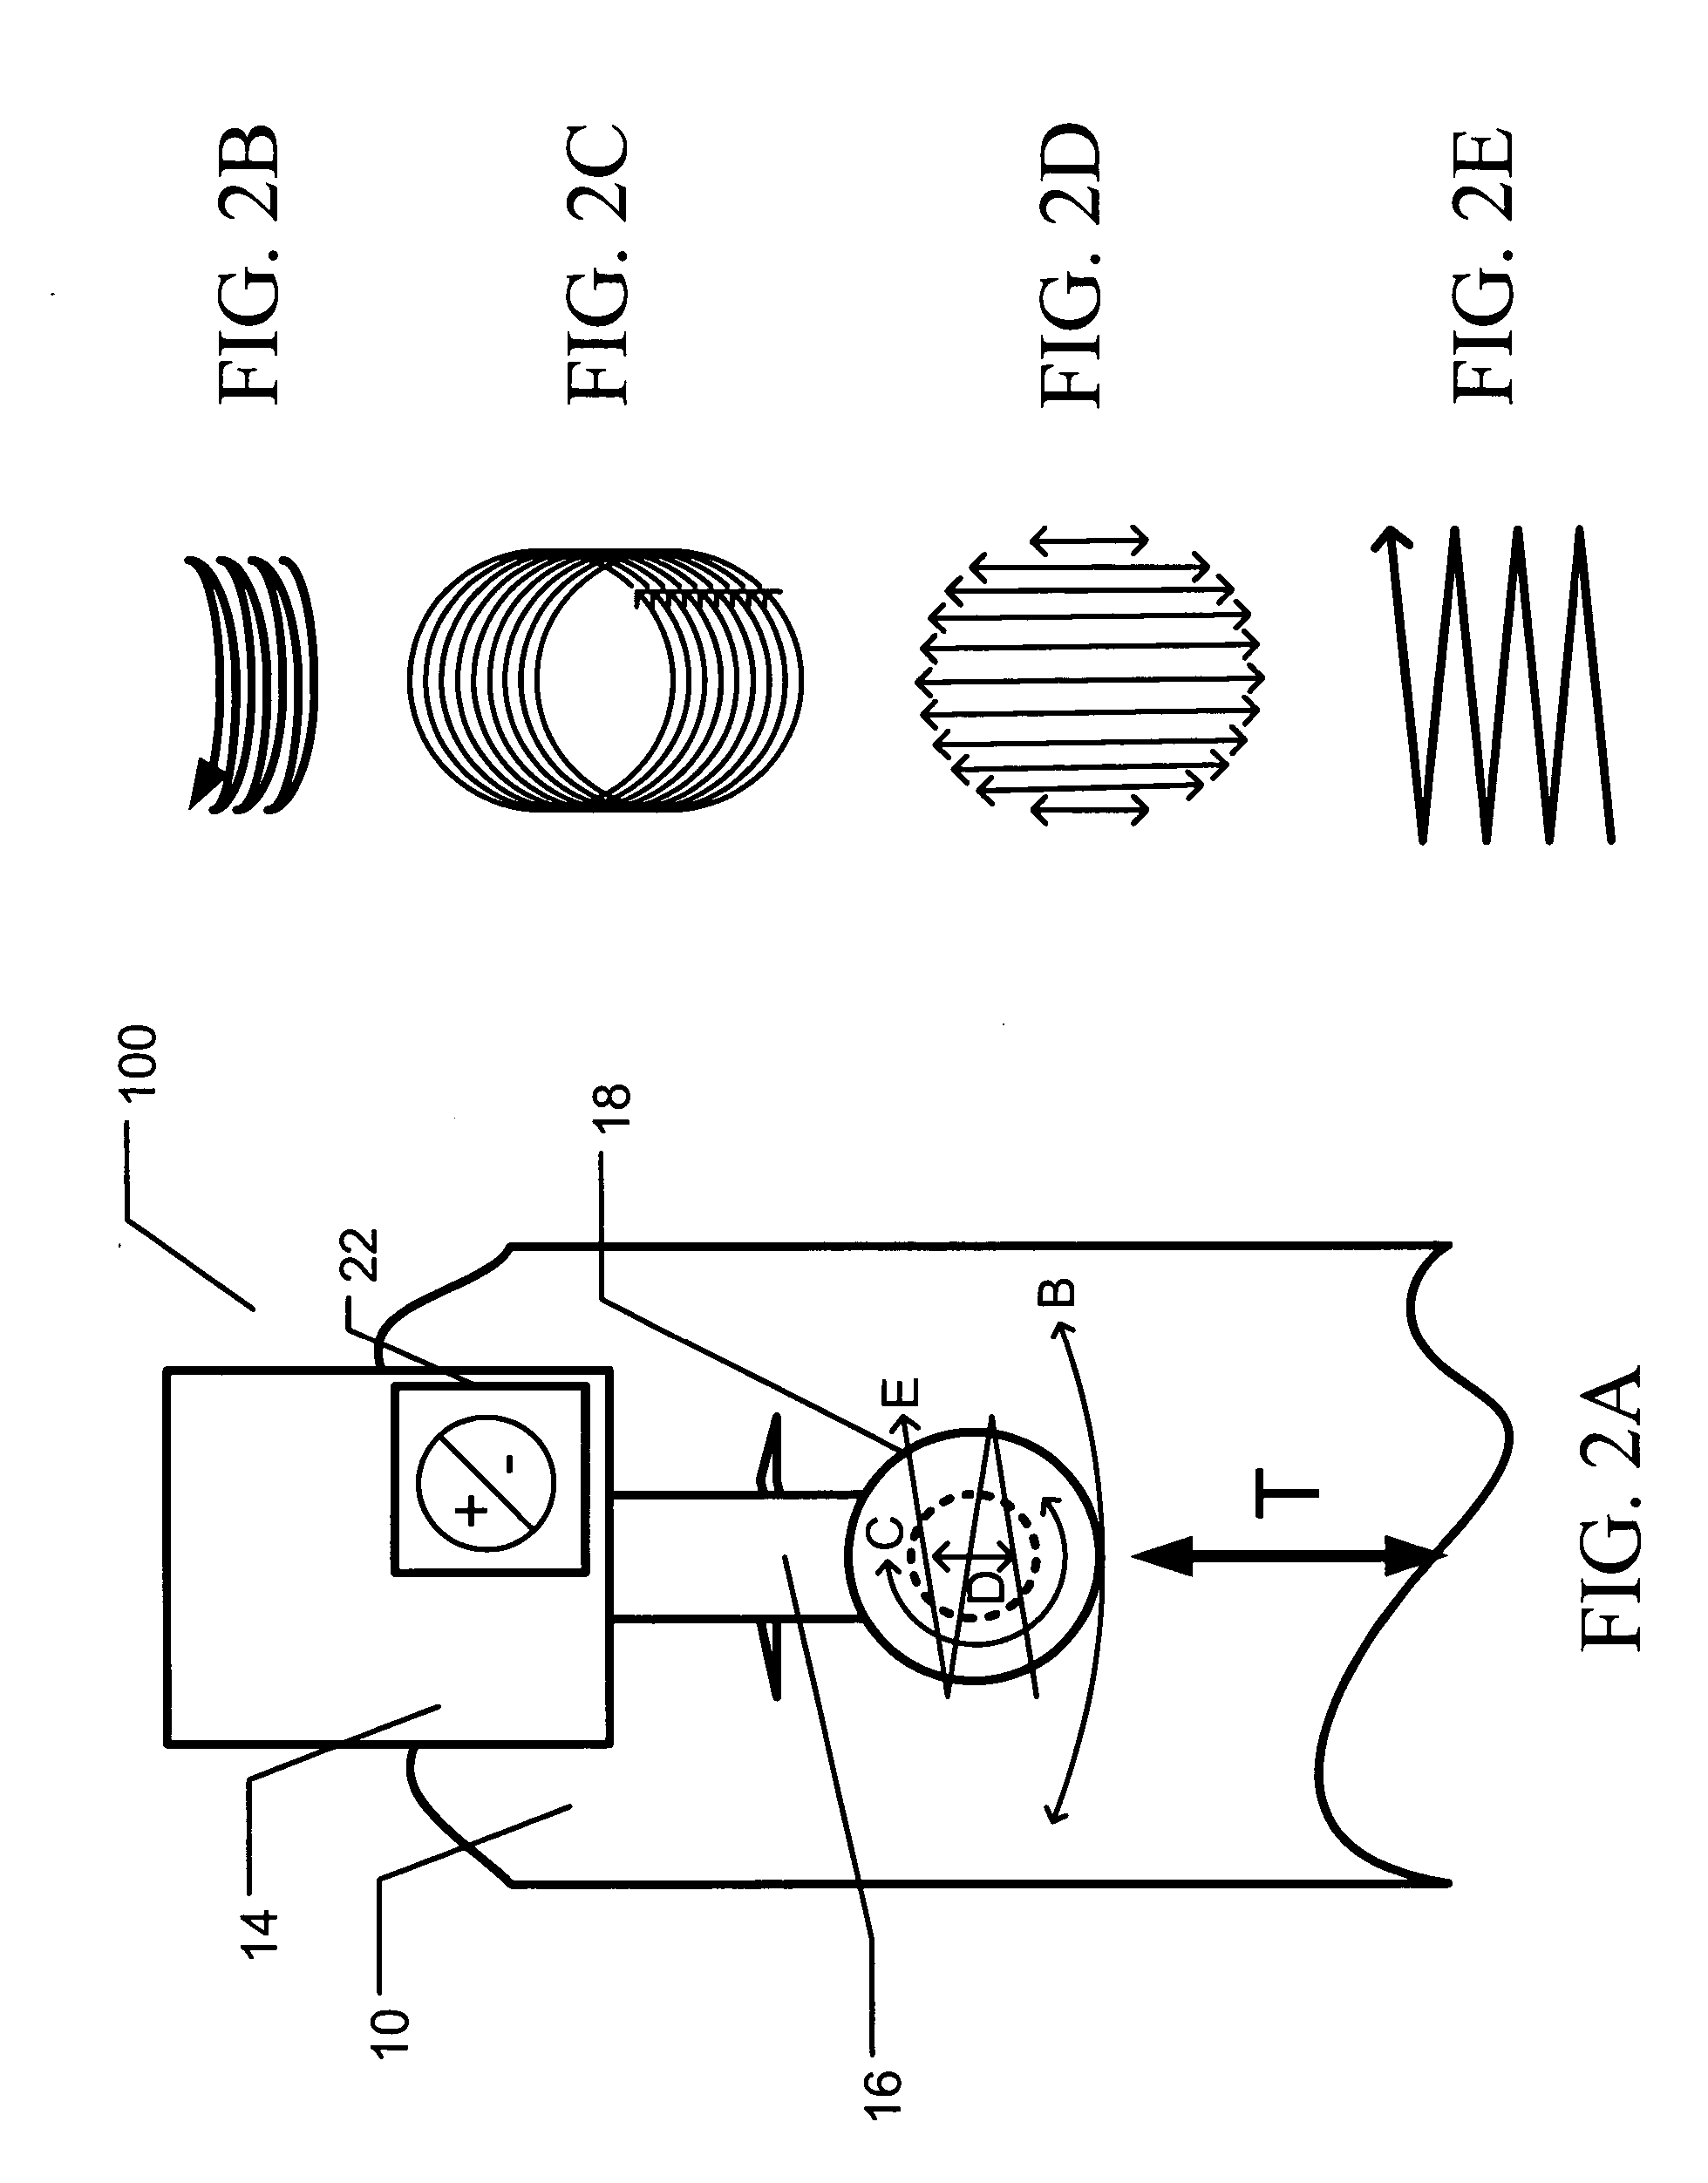 Apparatus and method for electrofriction welding